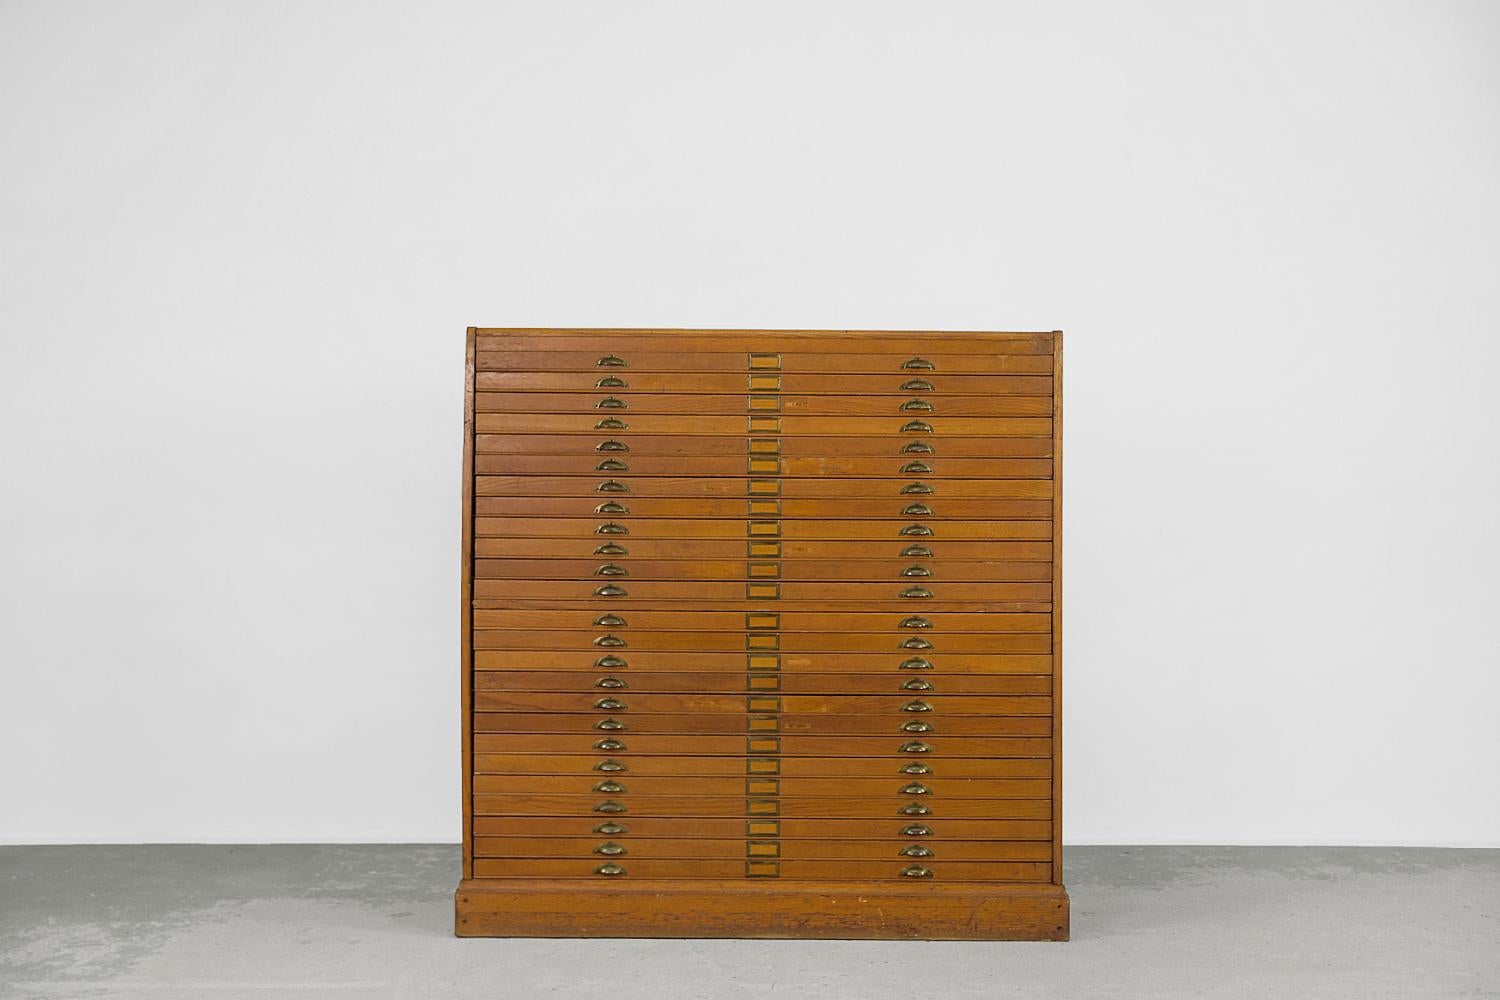 This large, industrial catalog cabinet with multiple flat drawers was made during the 1930s and comes from Artist's Atelie. It is made of high-quality oak wood, which is considered a royal material. Piece of furniture made of oak looks very good